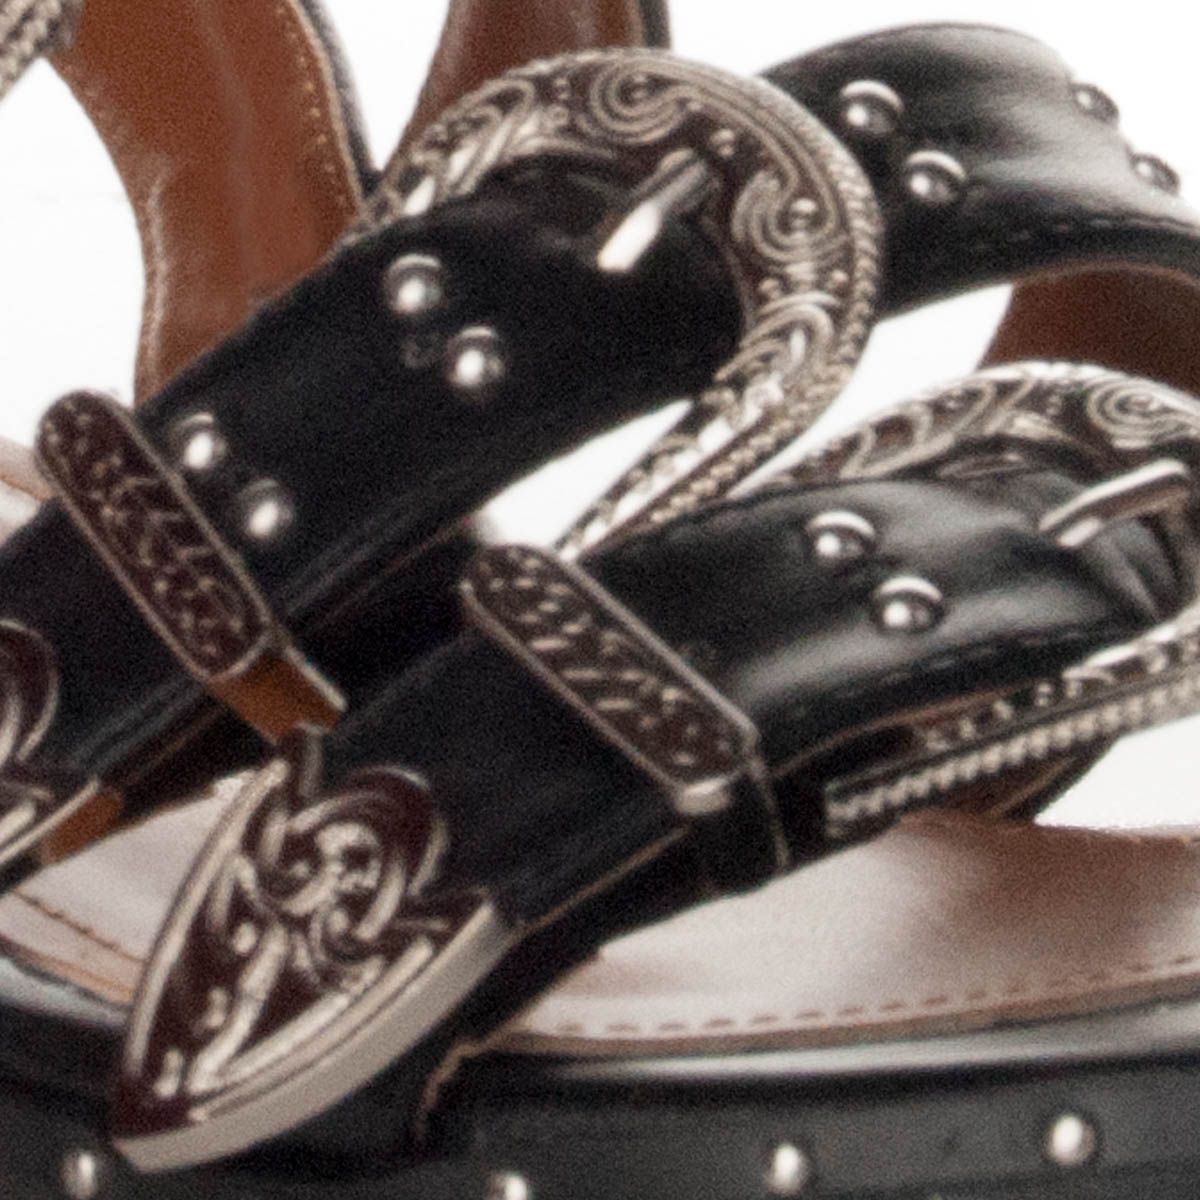 Sandal decorated with brooches and tacks. Fastened in the ankle by metal brooch. It is one of the styles that are more fashionable this summer, for its rocker style. Very comfortable and current.